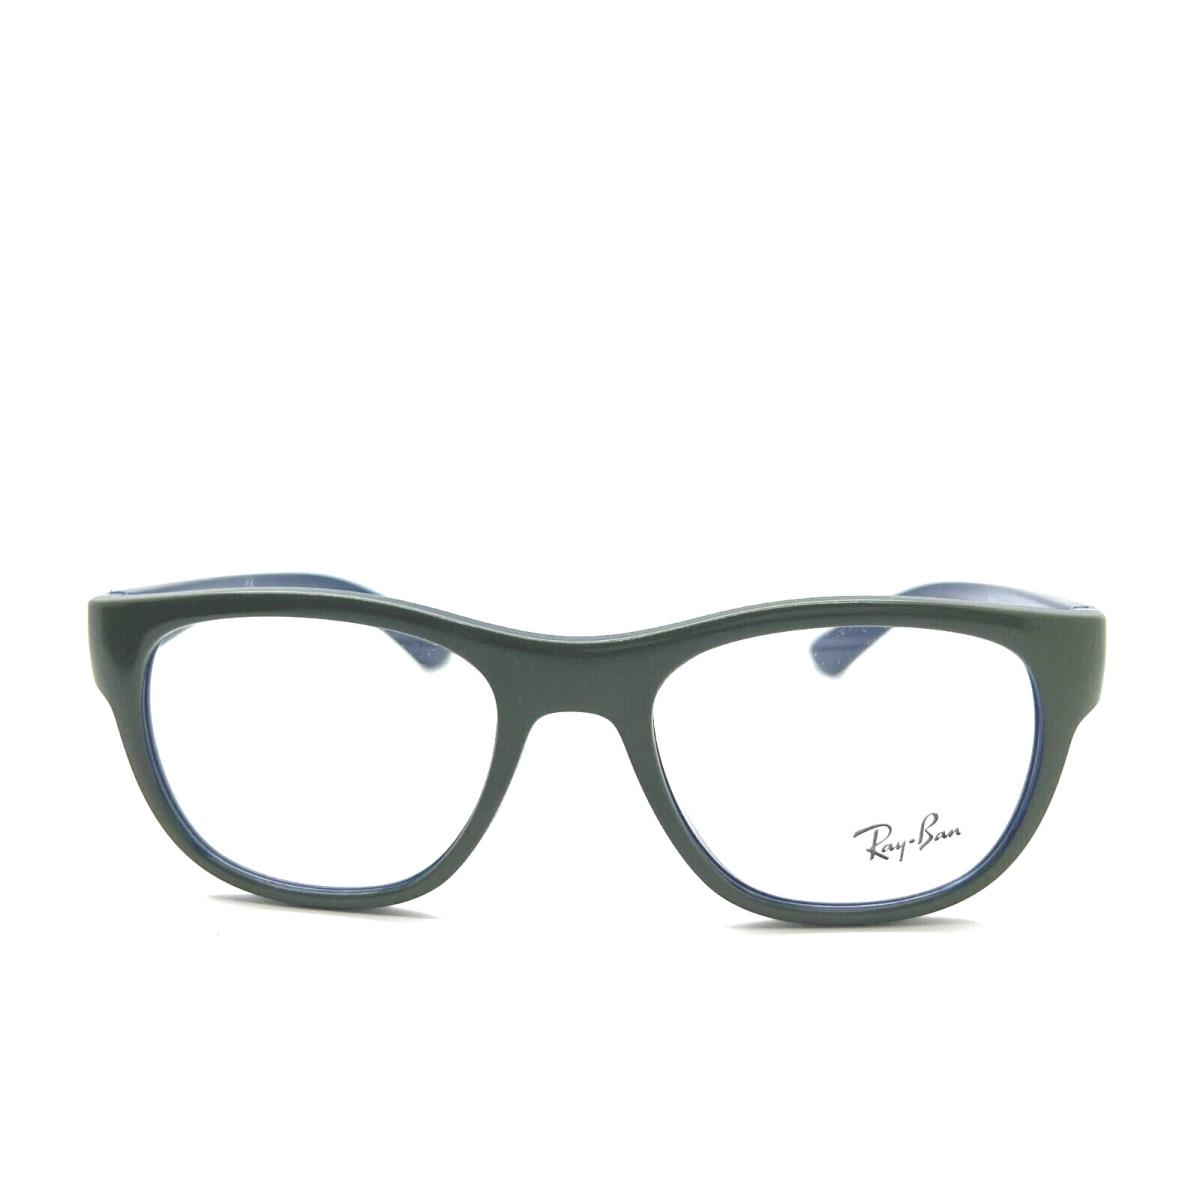 Ray-ban Eyewear RB 7191 8144 51 19 140 Green Over Blue Unisex Glasses Italy